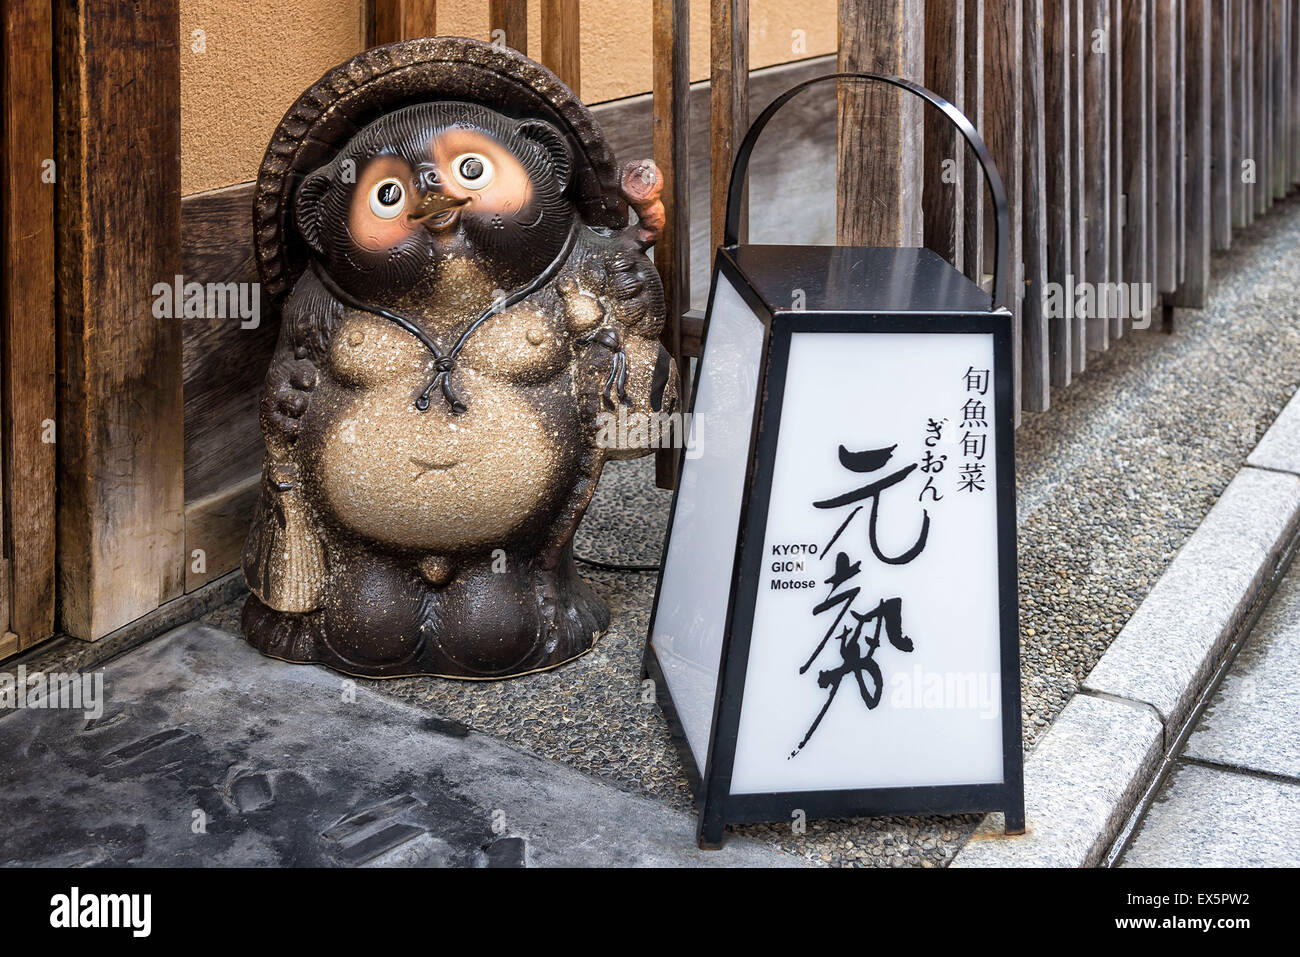 Kyoto, Japan - April 23, 2014: View of a Tanuki in Gion district. The tanuki has been significant in Japanese folklore. Stock Photo